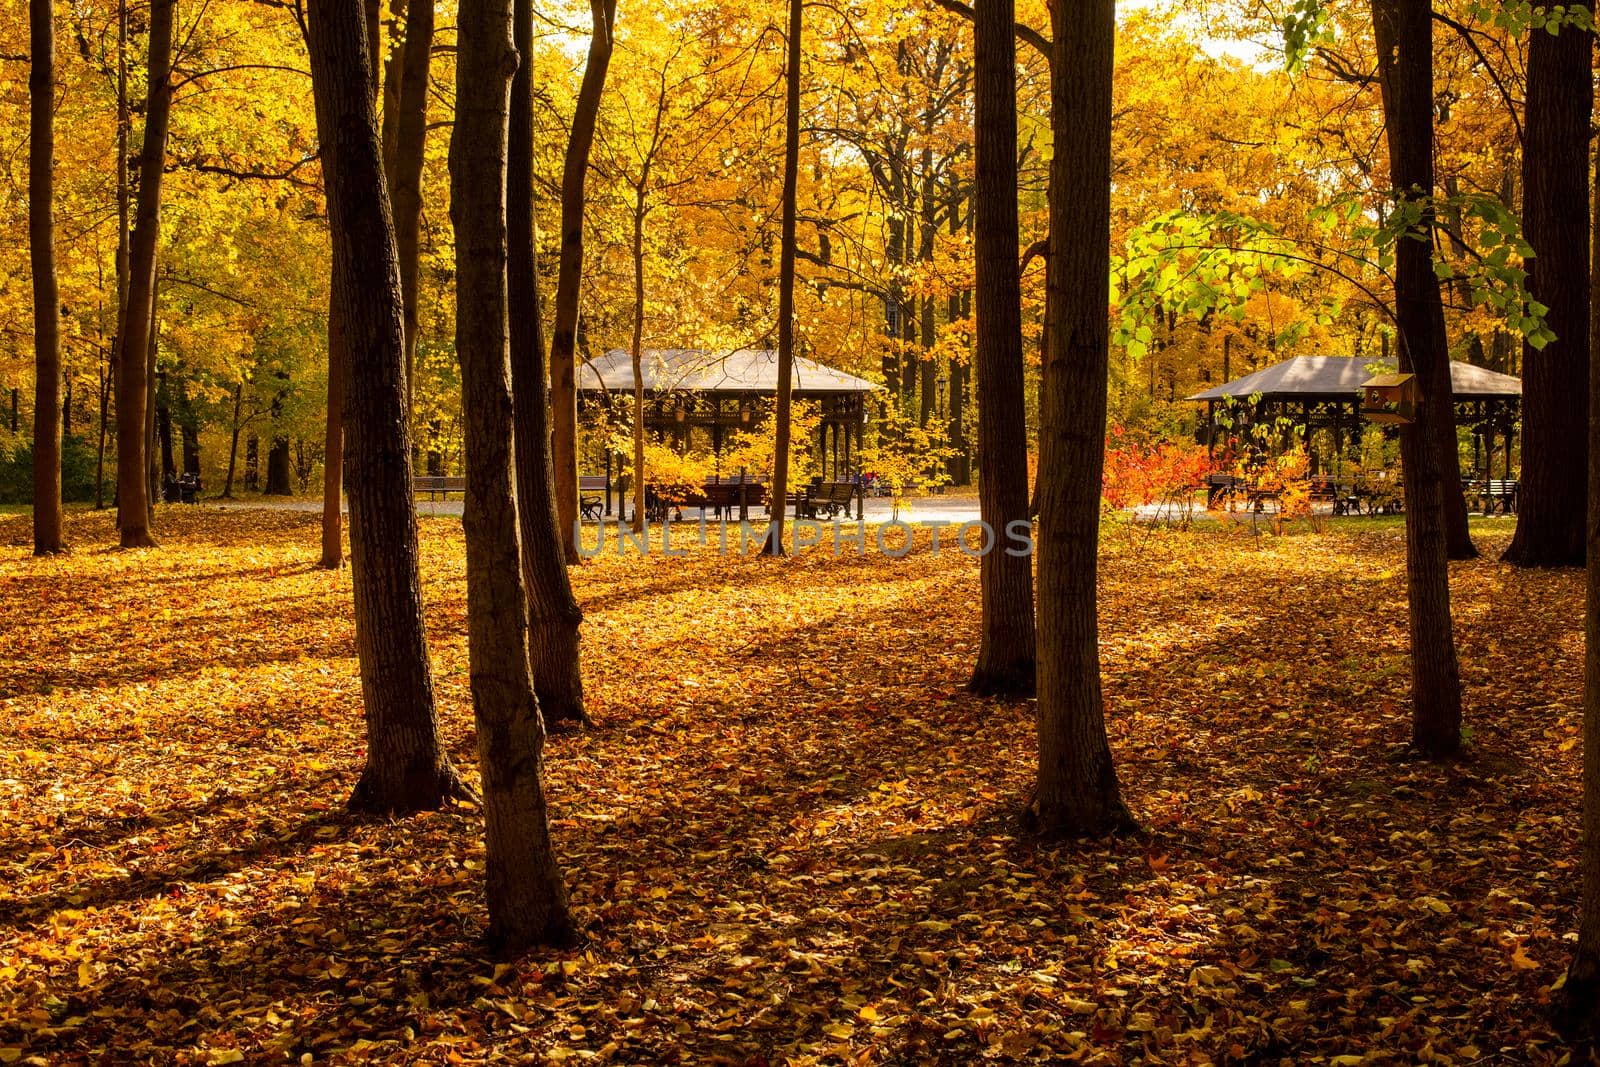 autumn park on a sunny fine day. gazebos in the autumn forest in the sun. golden autumn